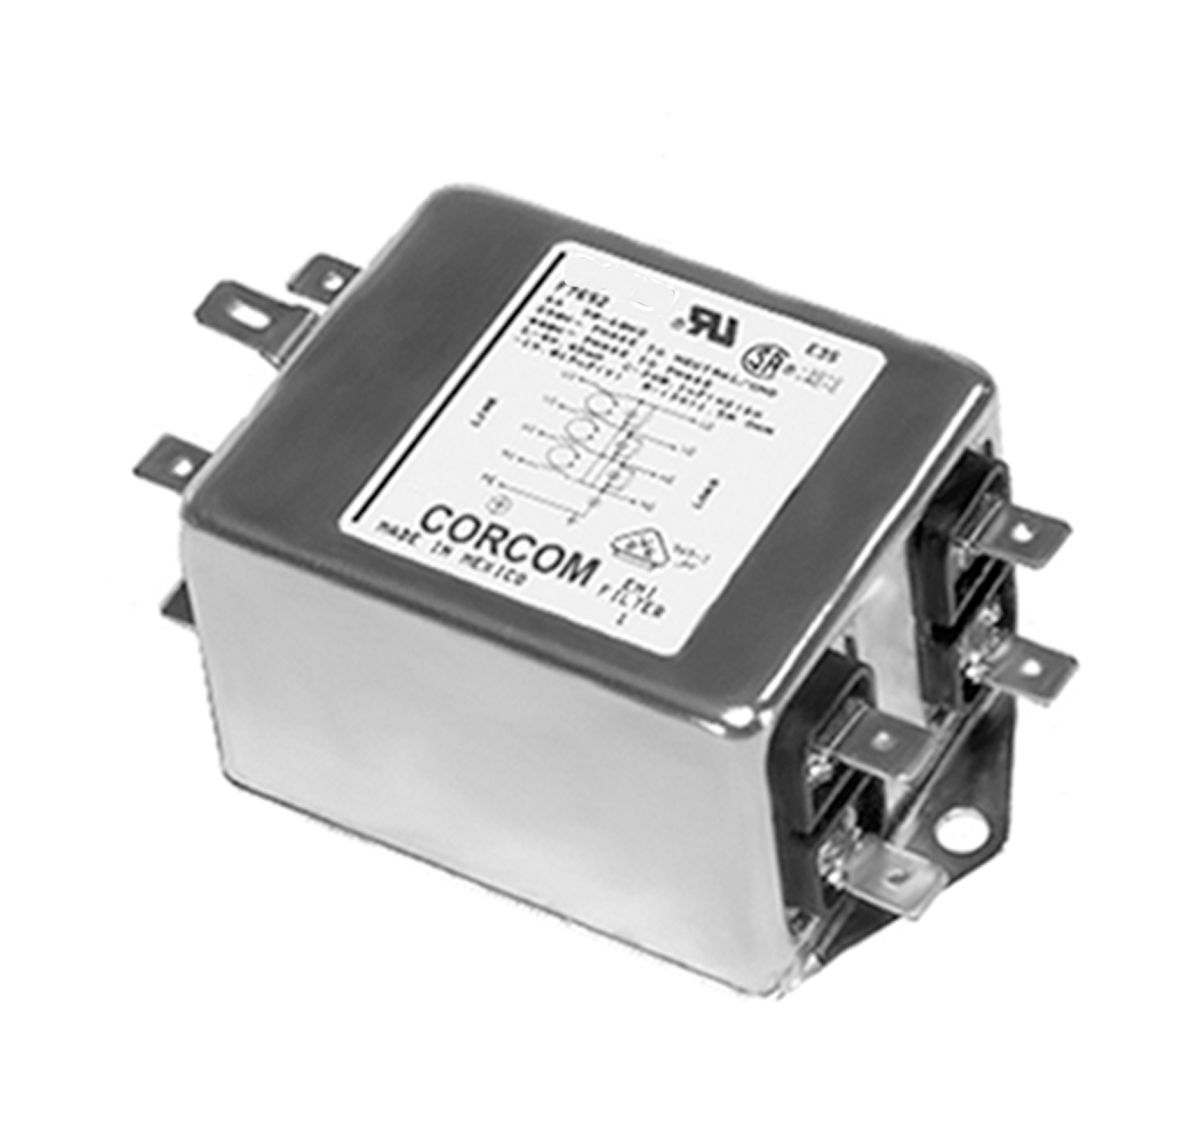 TE Connectivity, Corcom AYO 3A 250 V ac 50Hz, Flange Mount RFI Filter, Spade 3 Phase